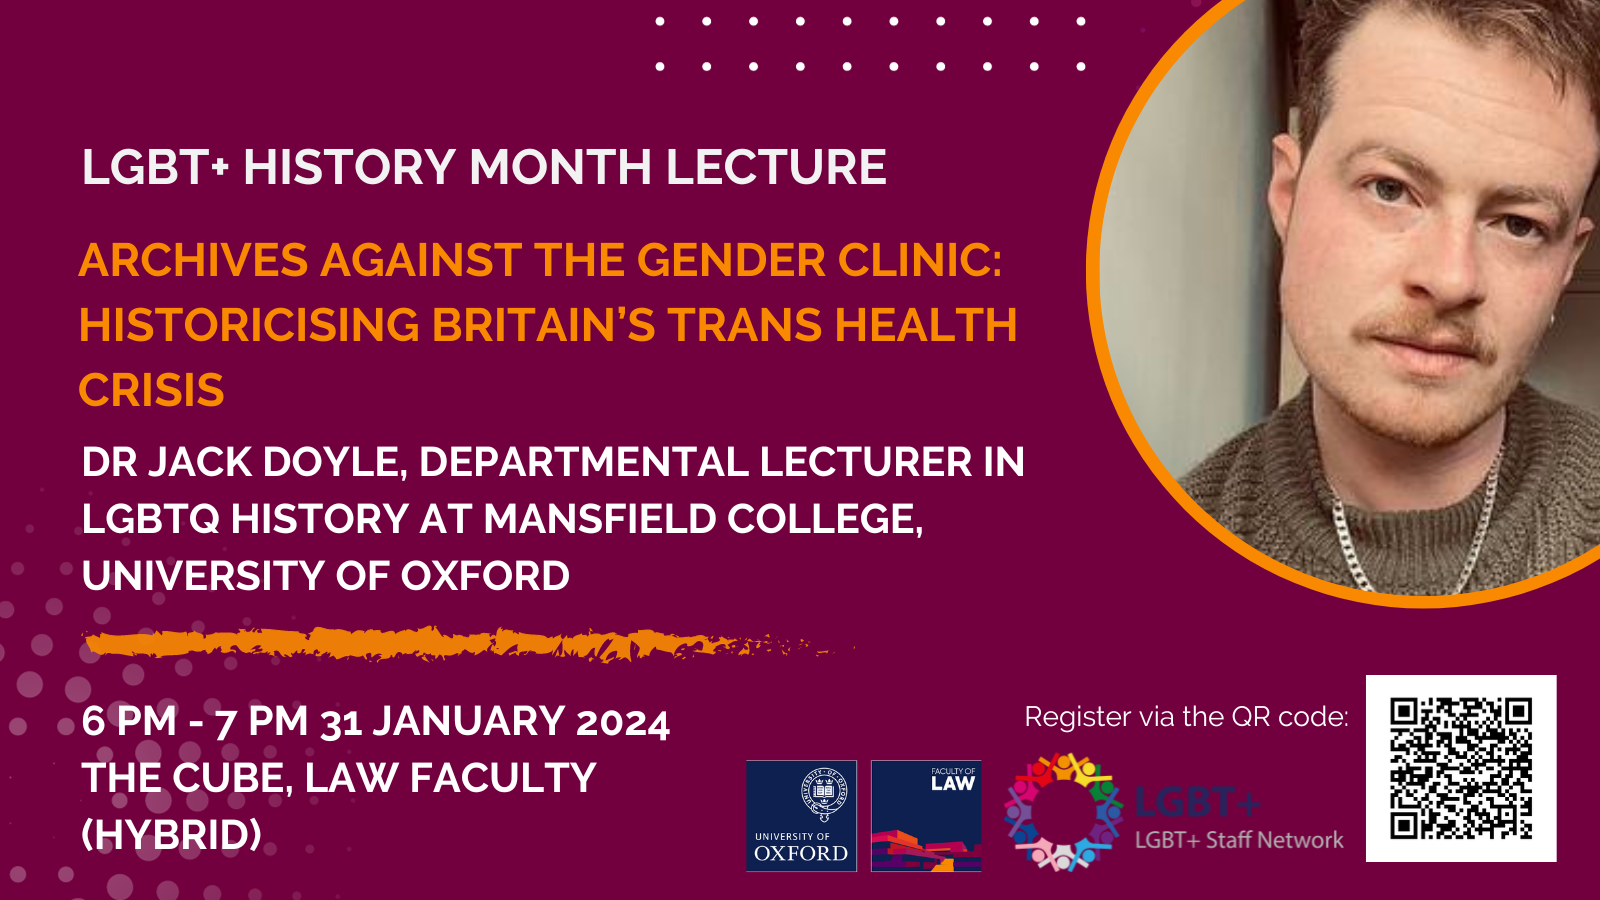 LGBT+ History Month Lecture 2024, Archives Against the Gender Clinic: Historicising Britain’s Trans Health Crisis, Dr Jack Doyle, Departmental Lecturer in LGBTQ History at Mansfield College, University of Oxford, 6pm-7pm, 31 January 2024, The Cube, Law Faculty (Hybrid)